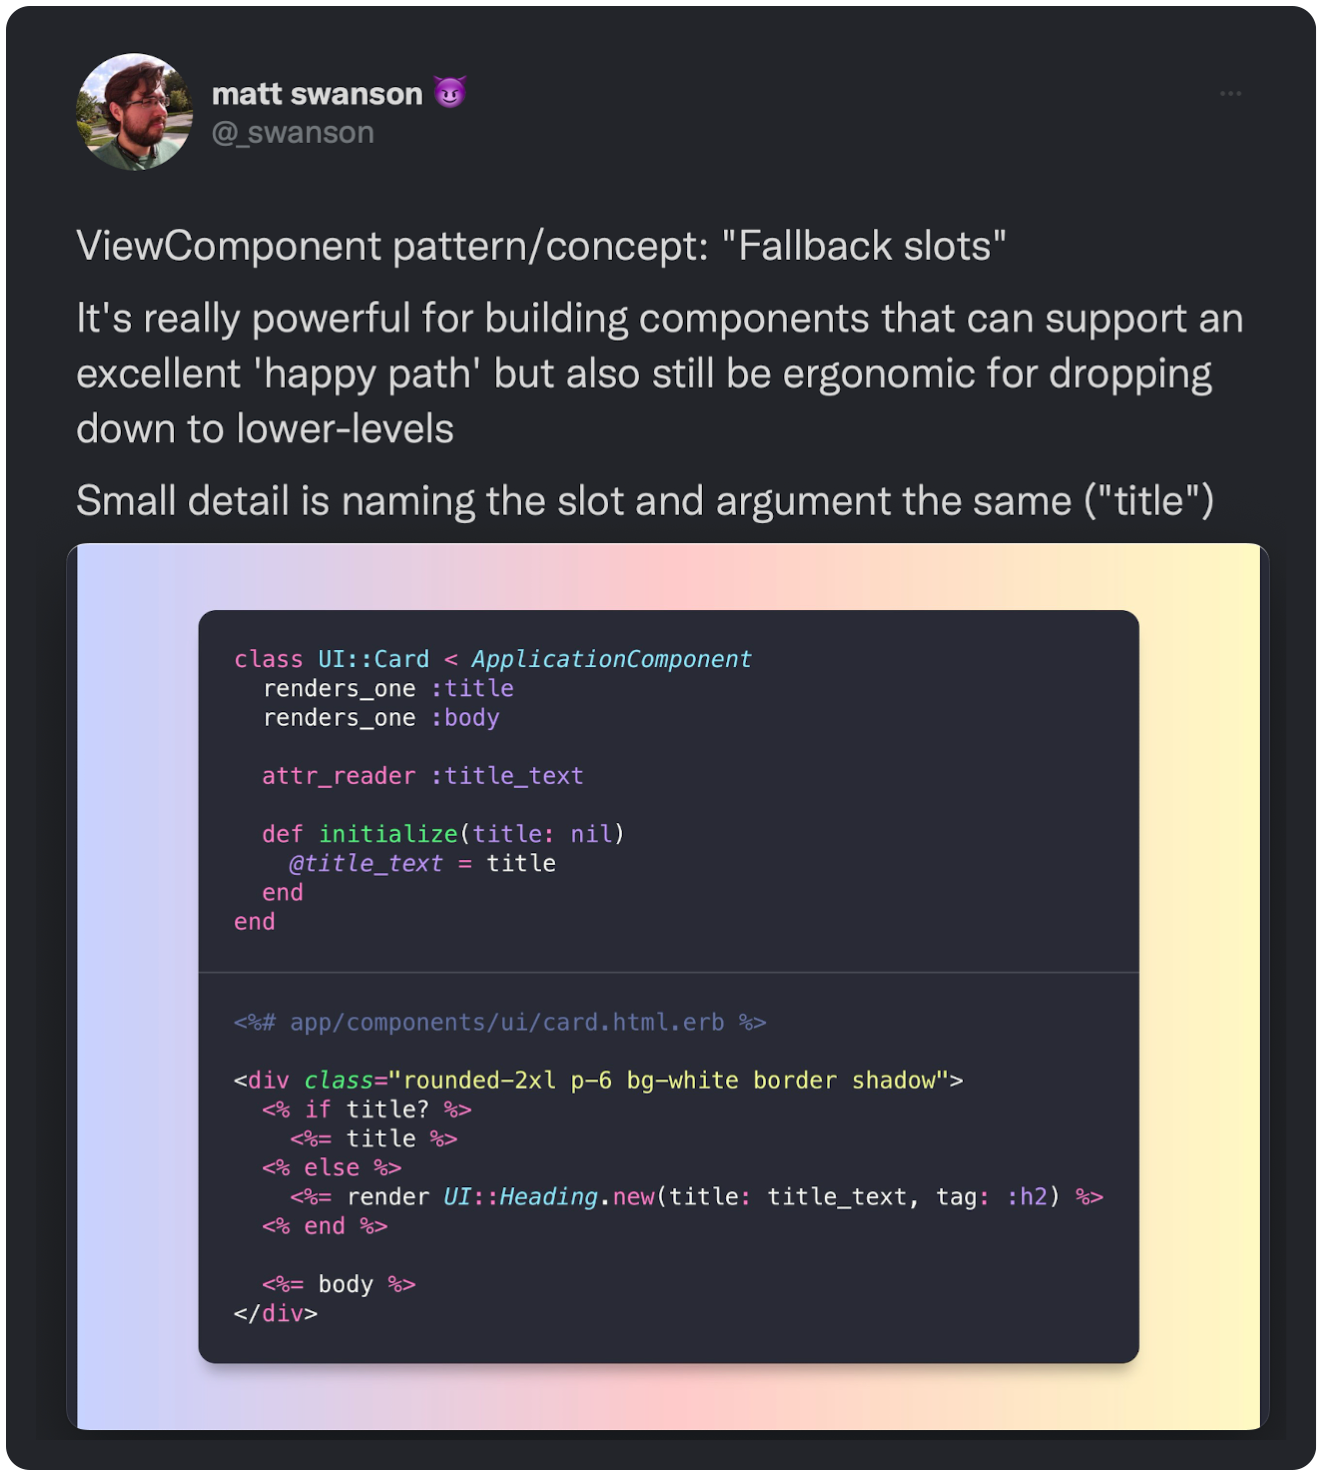 ViewComponent pattern/concept: "Fallback slots" It's really powerful for building components that can support an excellent 'happy path' but also still be ergonomic for dropping down to lower-levels Small detail is naming the slot and argument the same ("title") 